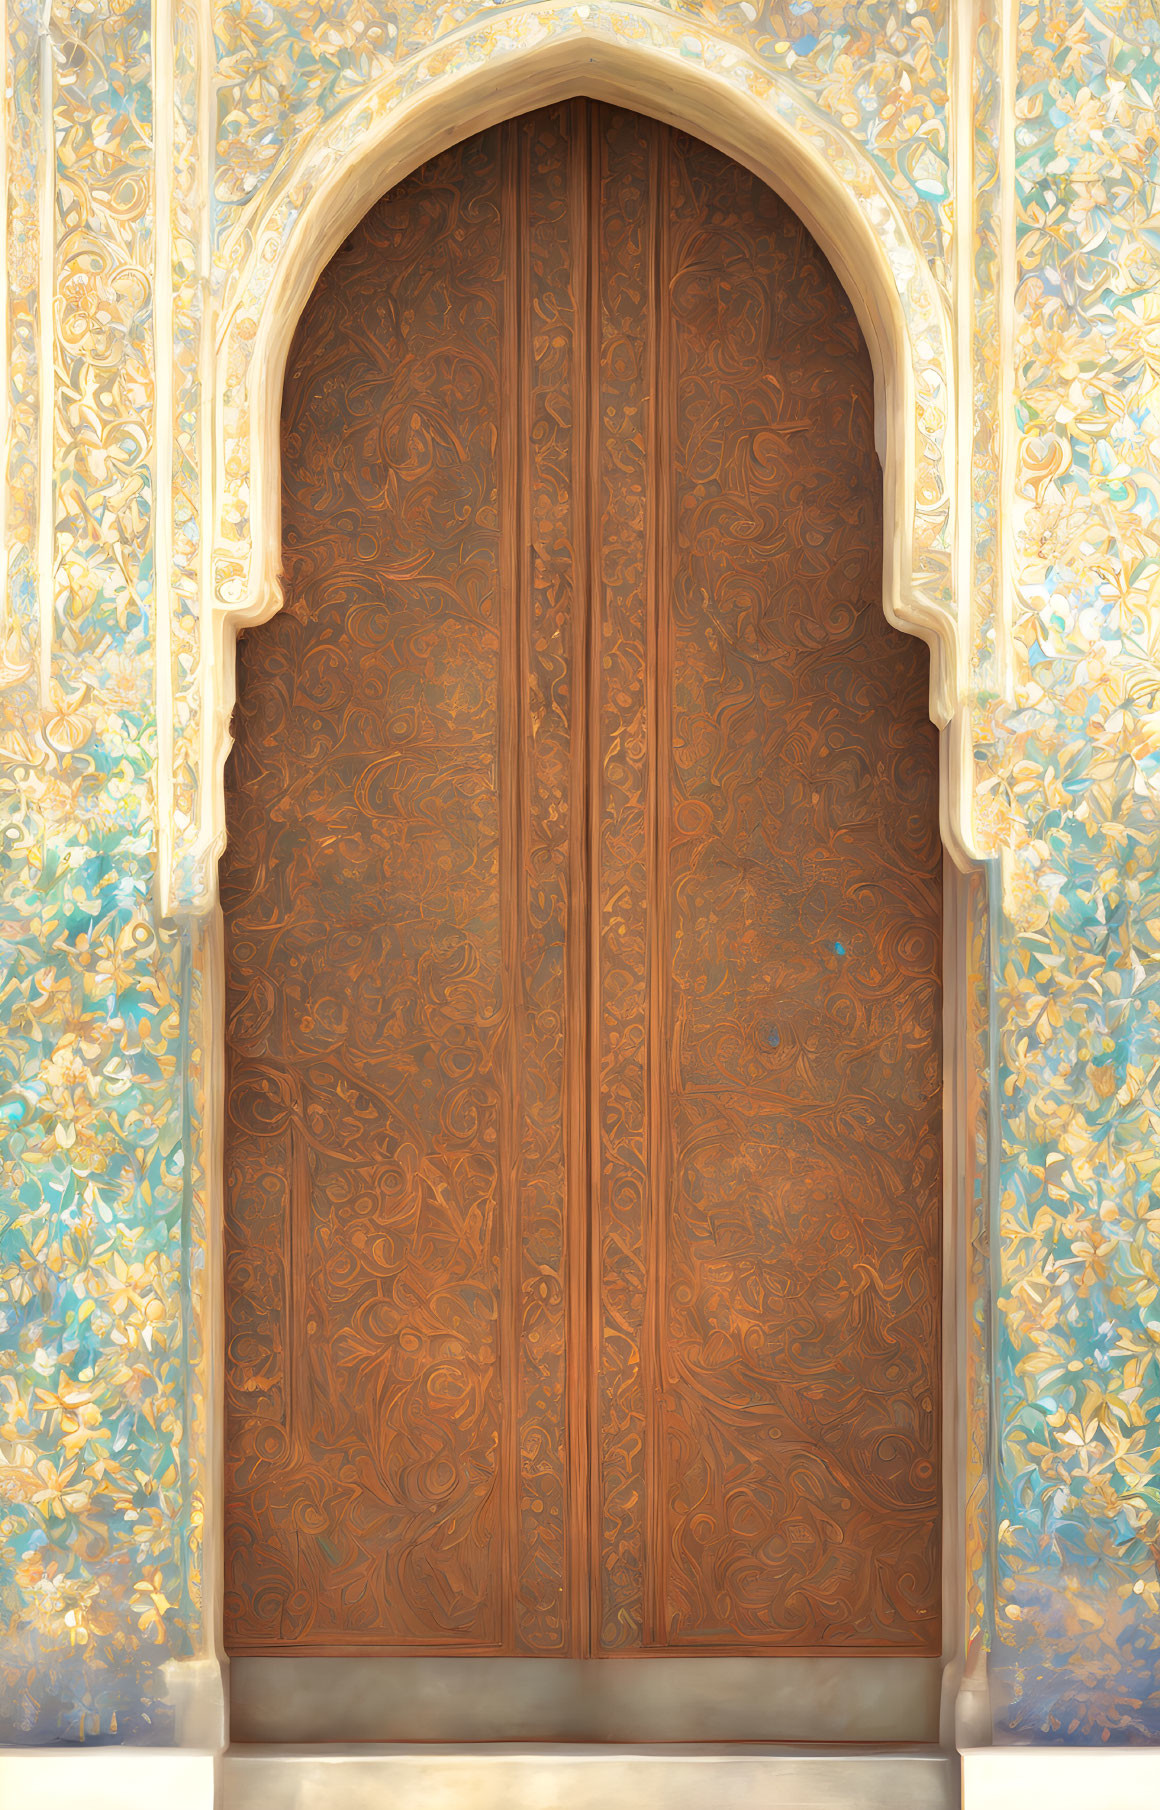 Intricate wooden door in arched frame with floral mosaic wall